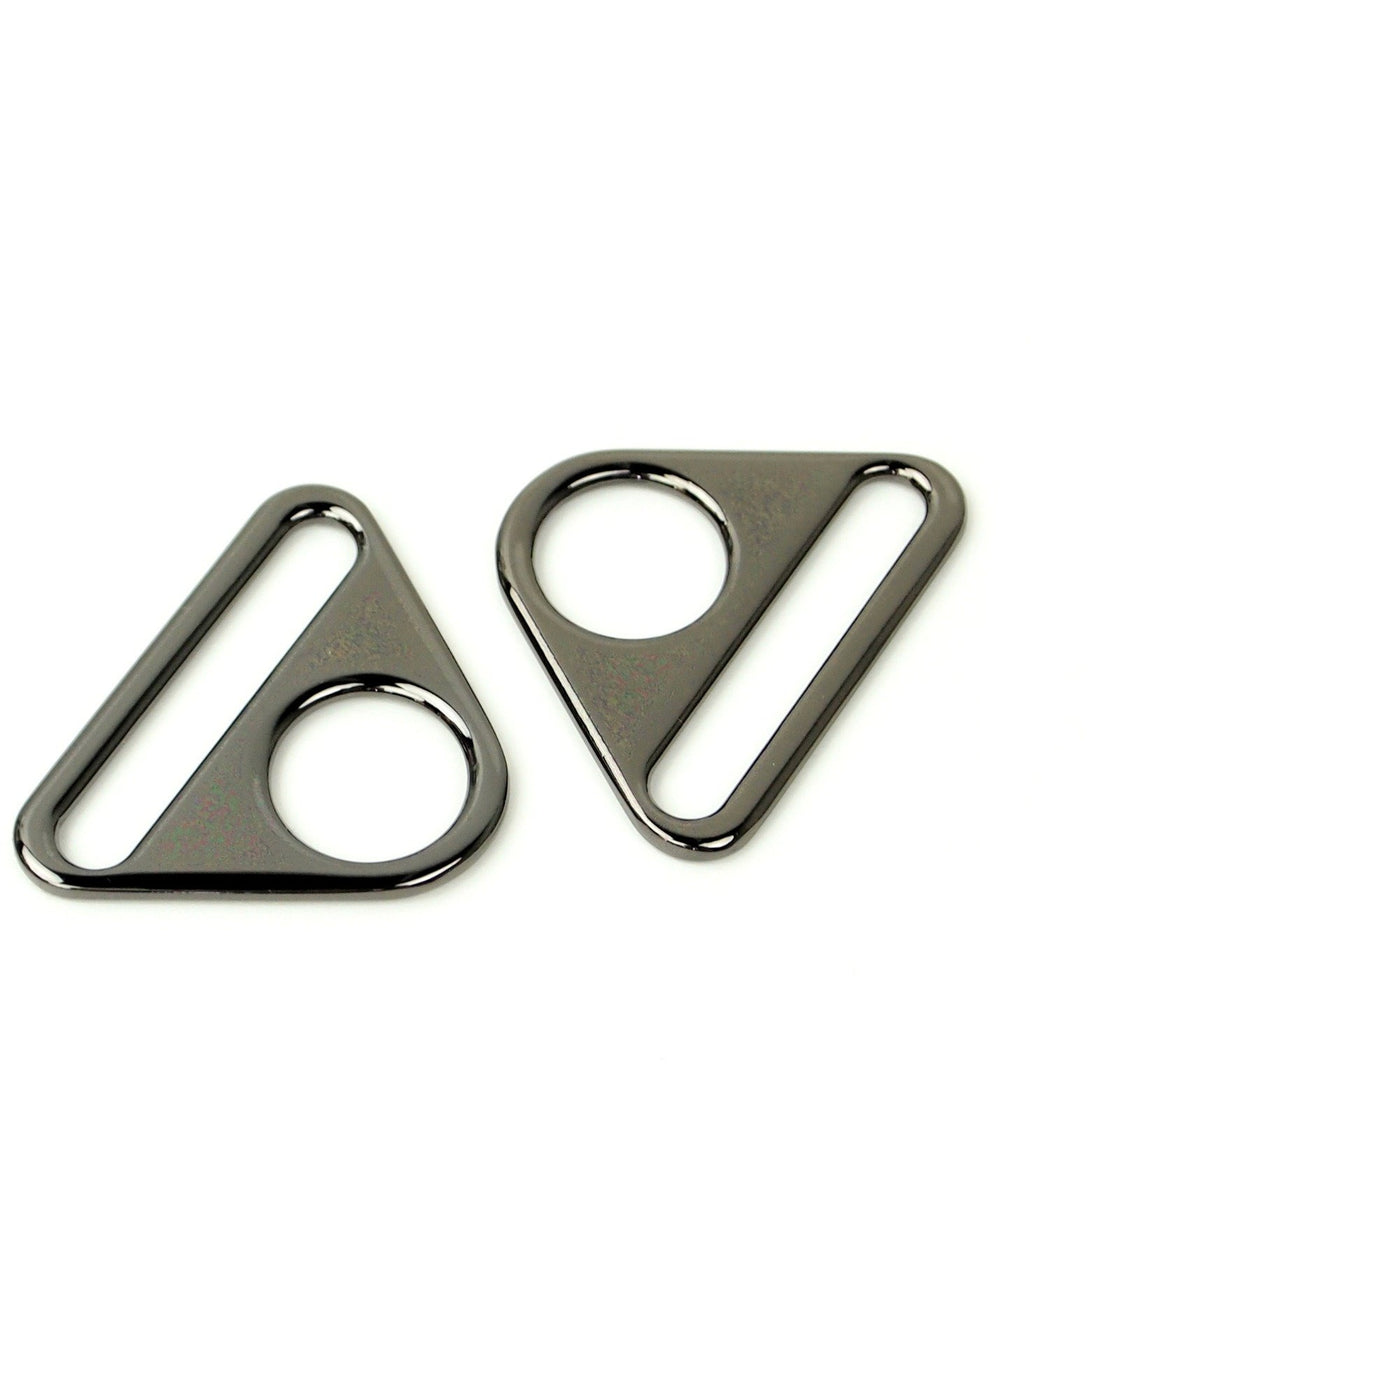 Two Triangle Rings 1 1/2"